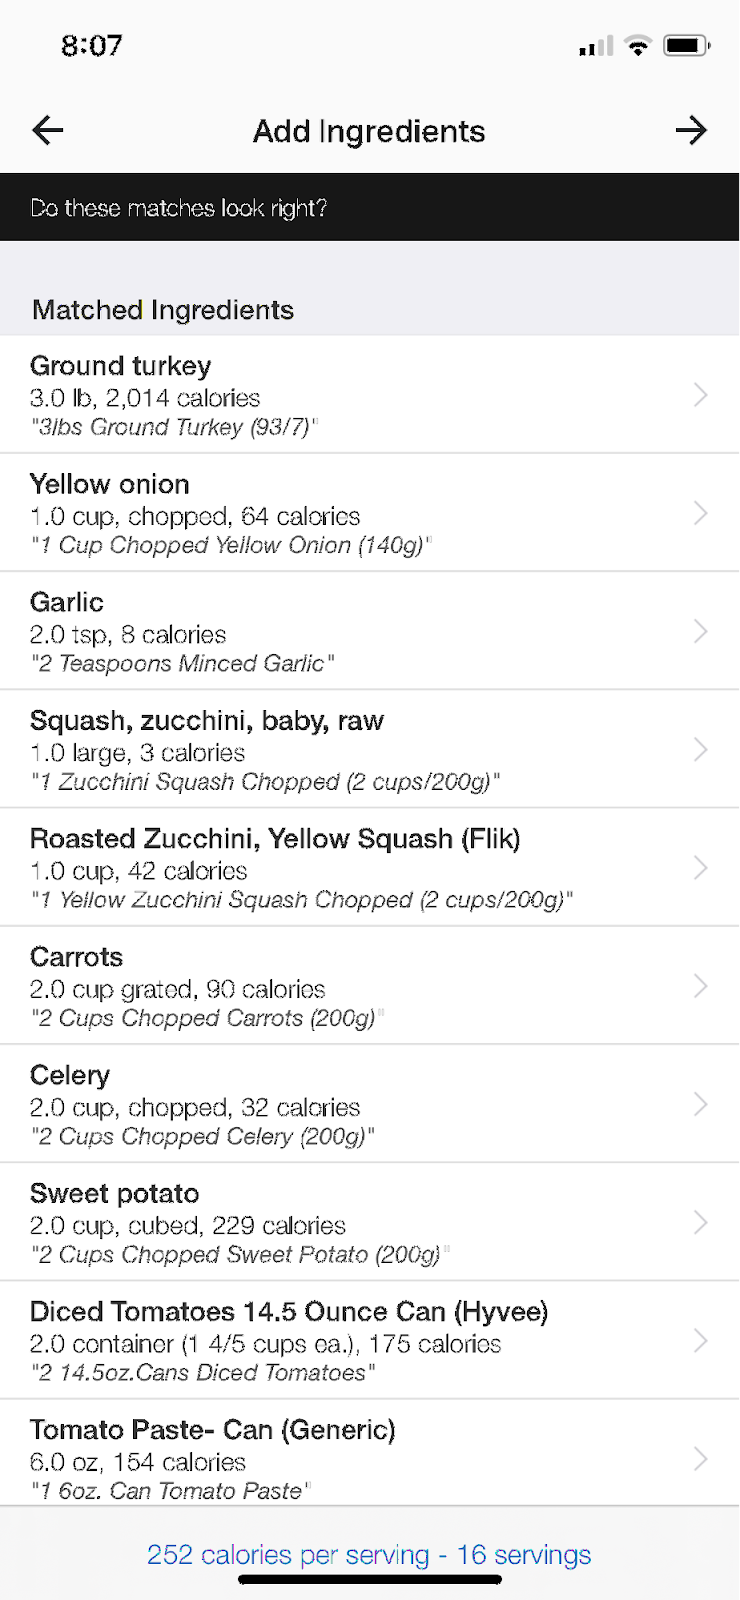 How to pre-plan Your meals & Track Your Macros Using MyFitnessPal: A  Tutorial, by Michalange Rosidor